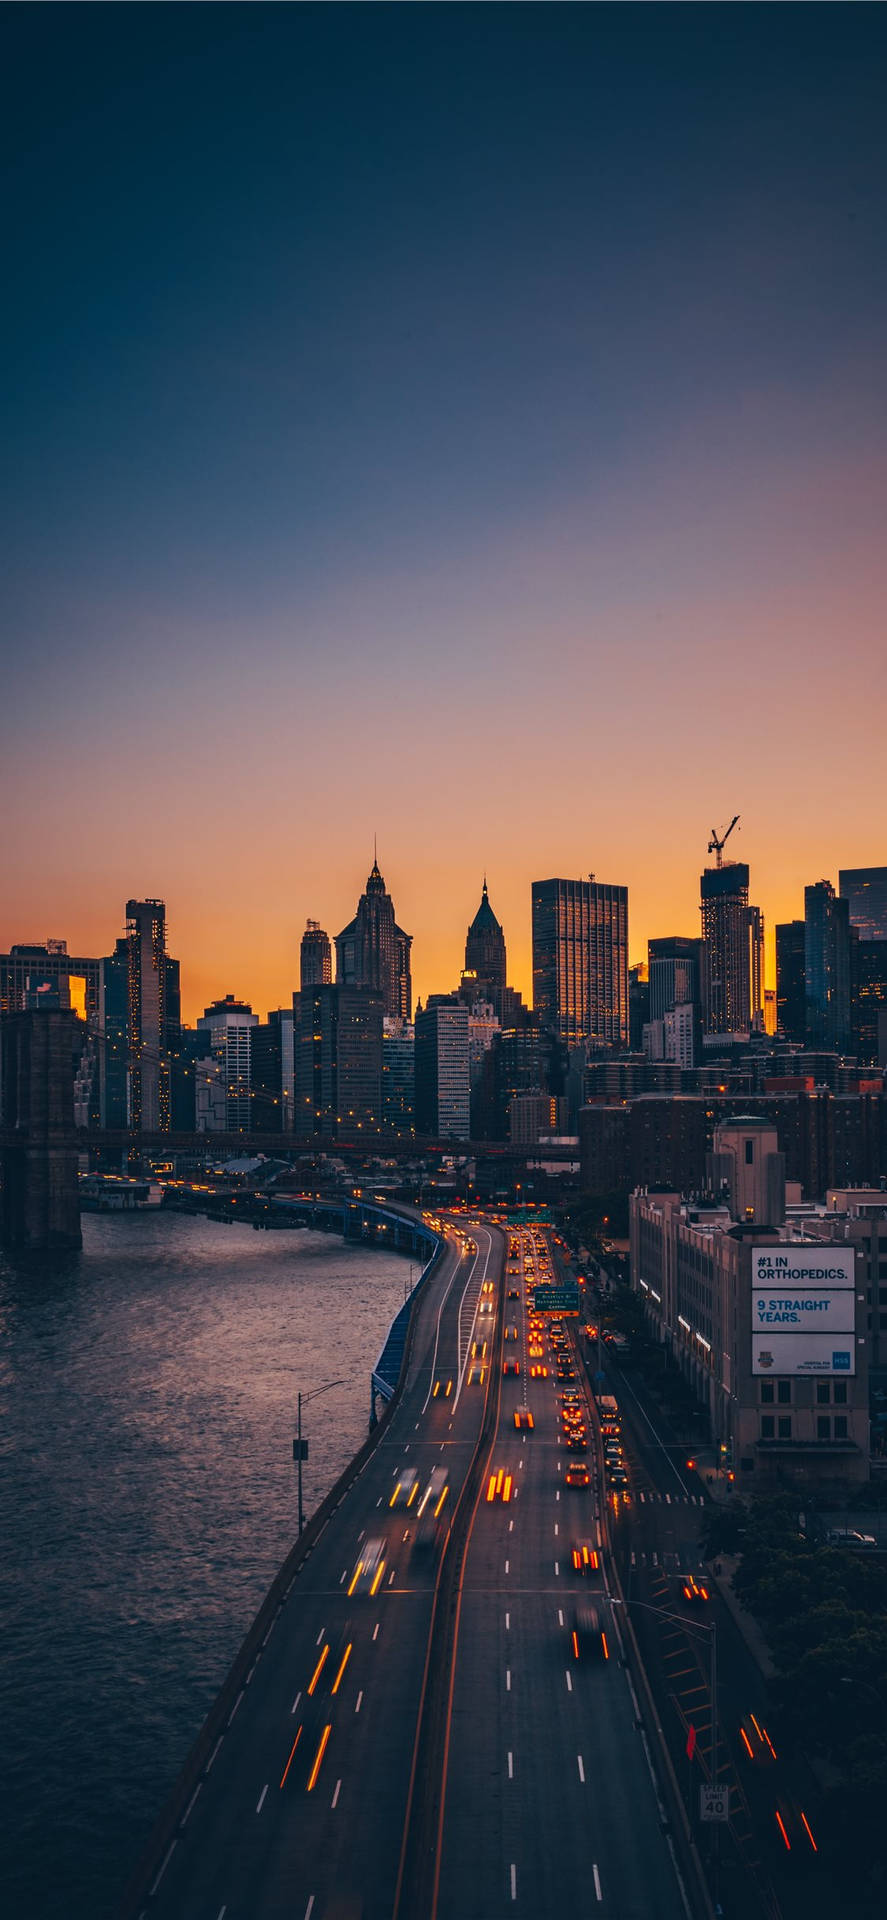 Enjoy a breathtaking view of New York skyline from your iPhone Wallpaper